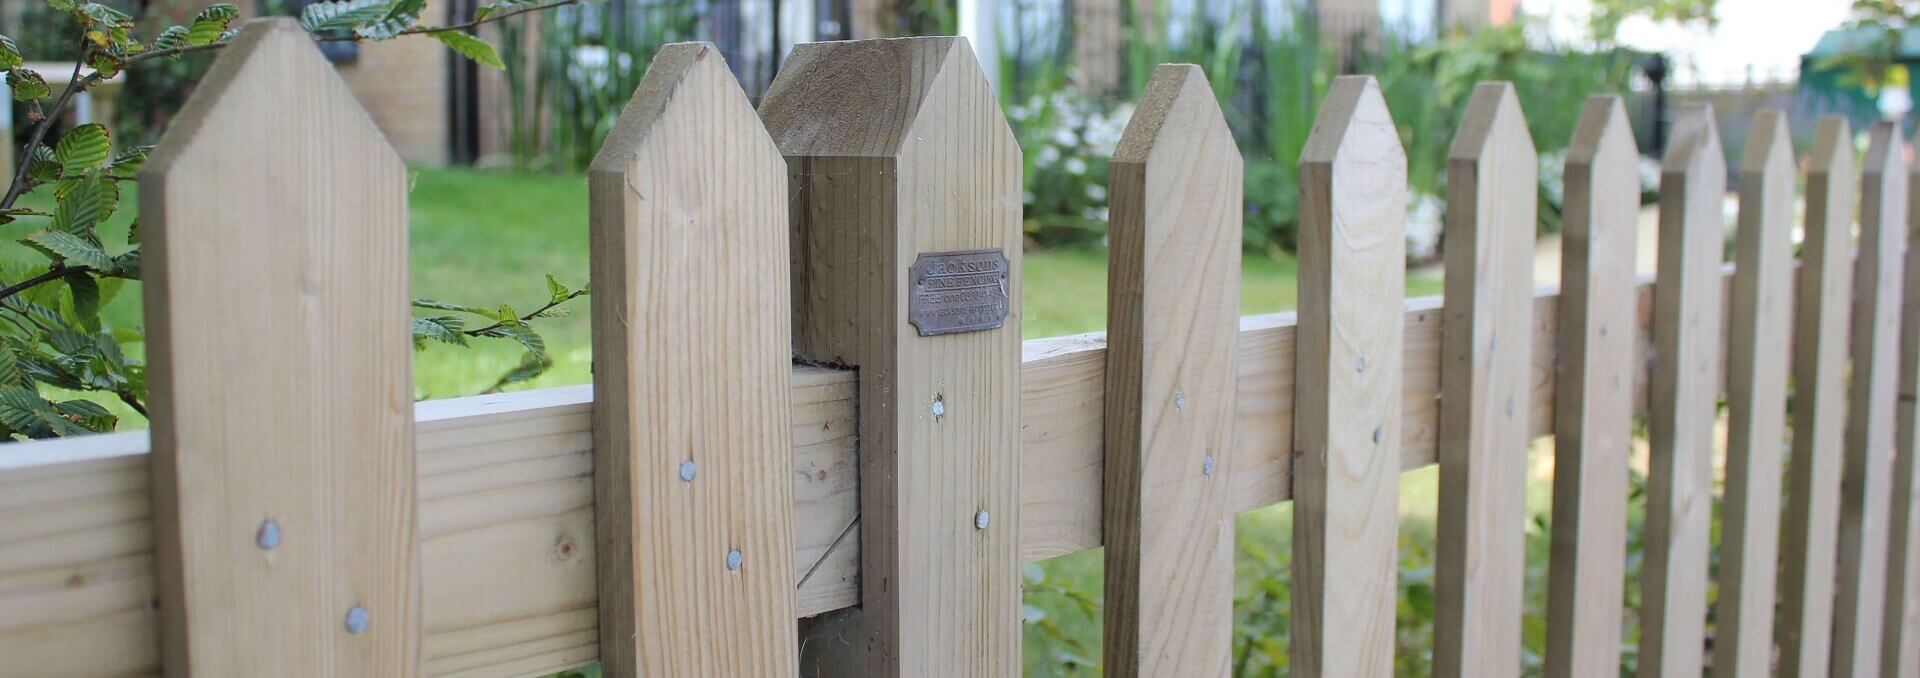 Traditional picket fence